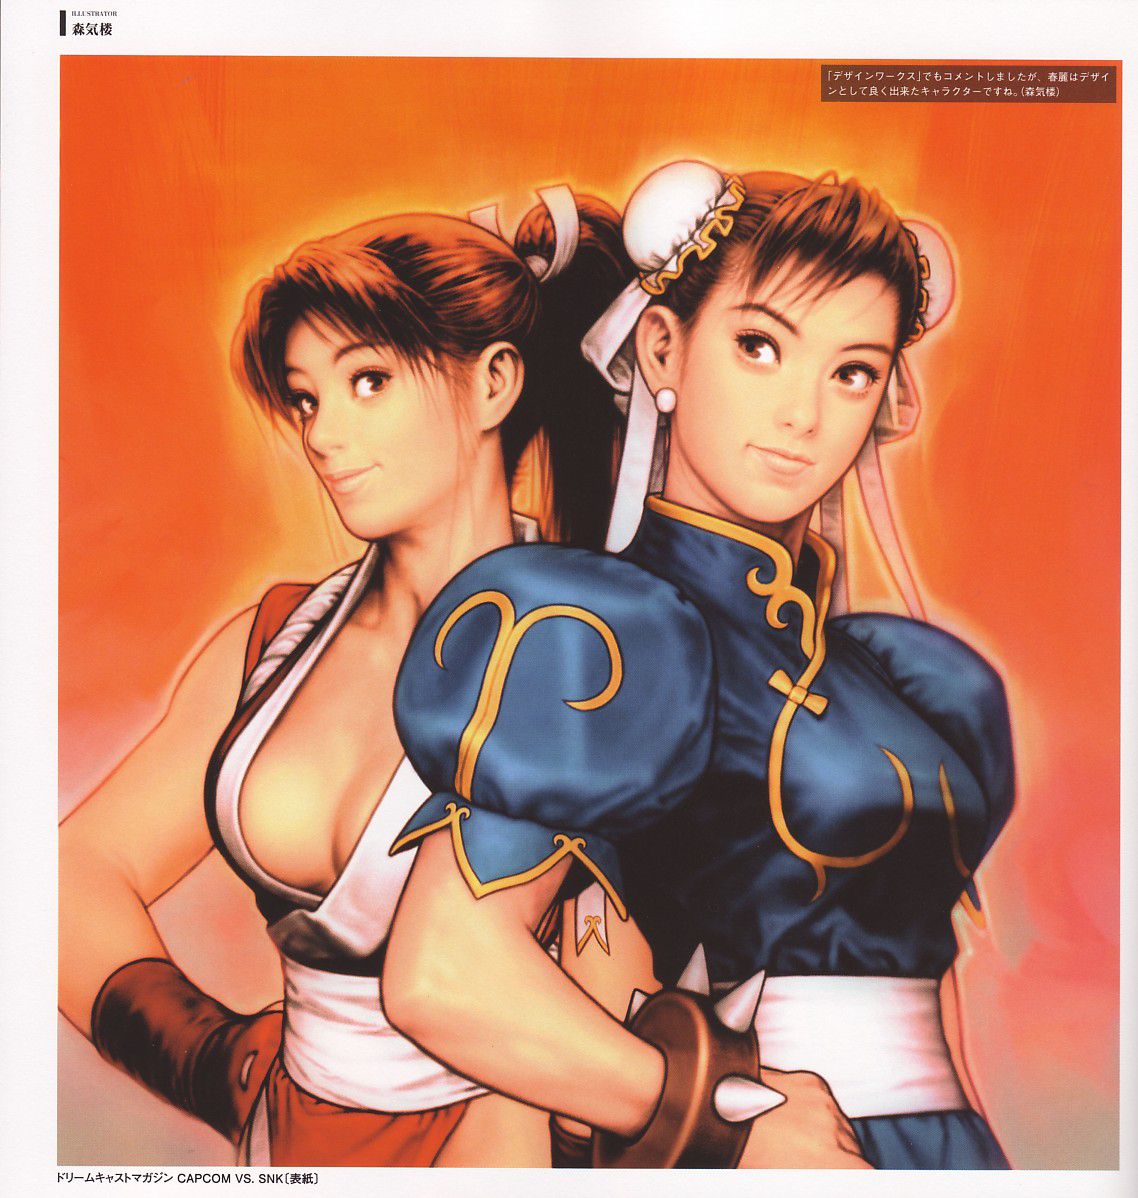 [Image] said Mai Shiranui rated game ever on the best erotic character wwwwwwww 23